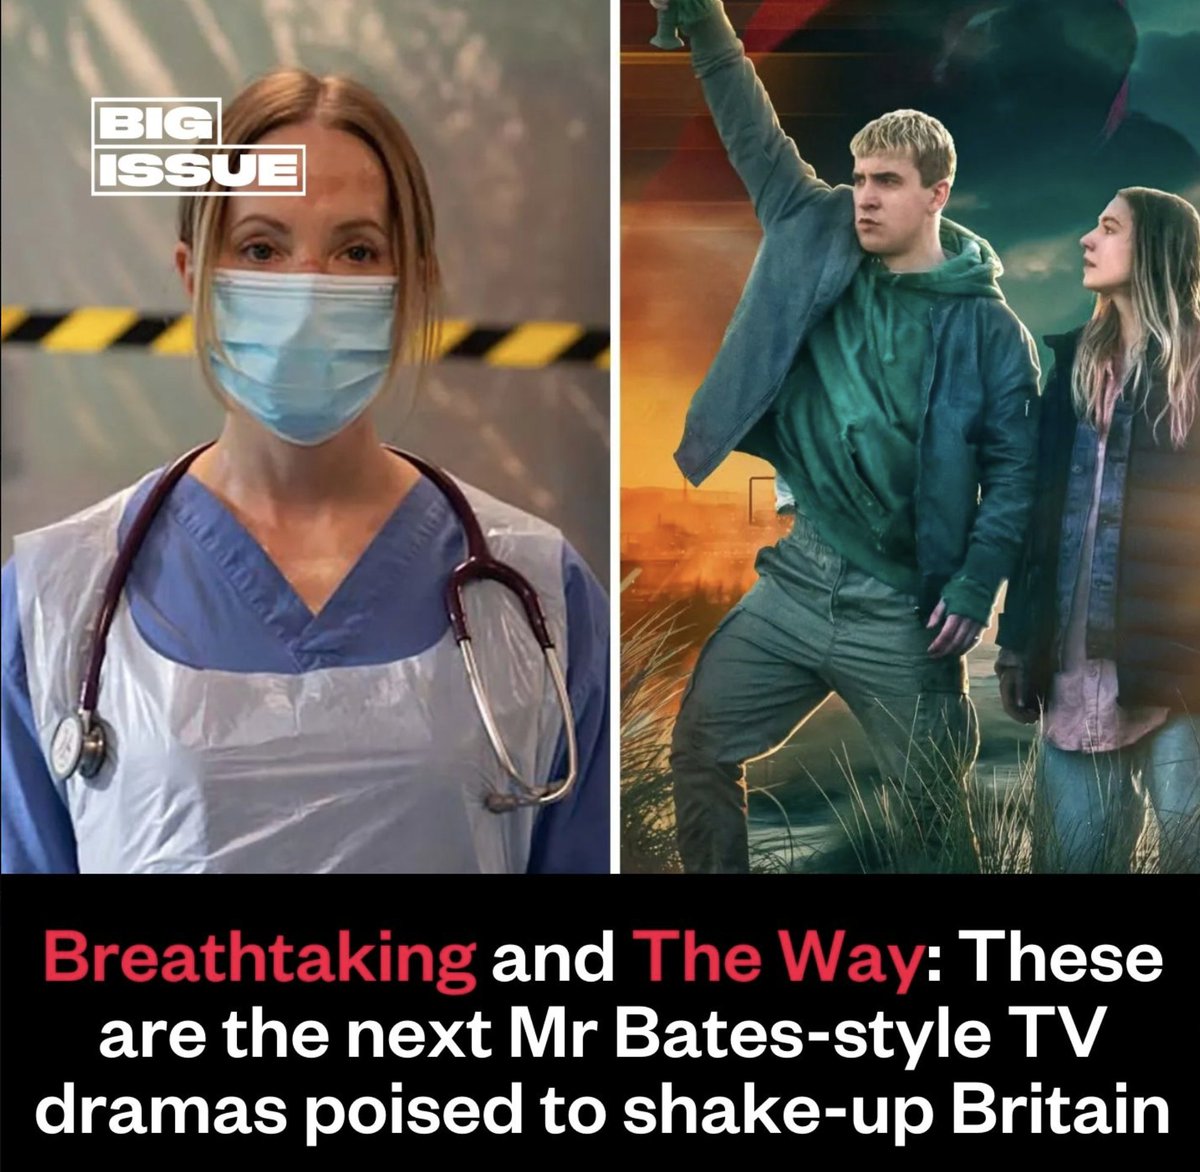 'Watch out Rishi Sunak, television drama is in revolt.' Thanks so much @adey70 for this fantastic piece in this week's @BigIssue about BREATHTAKING and THE WAY. Stories matter. The truth matters. BREATHTAKING starts 9pm Monday on ITV #NHS 💙 bigissue.com/culture/tv/tv-…